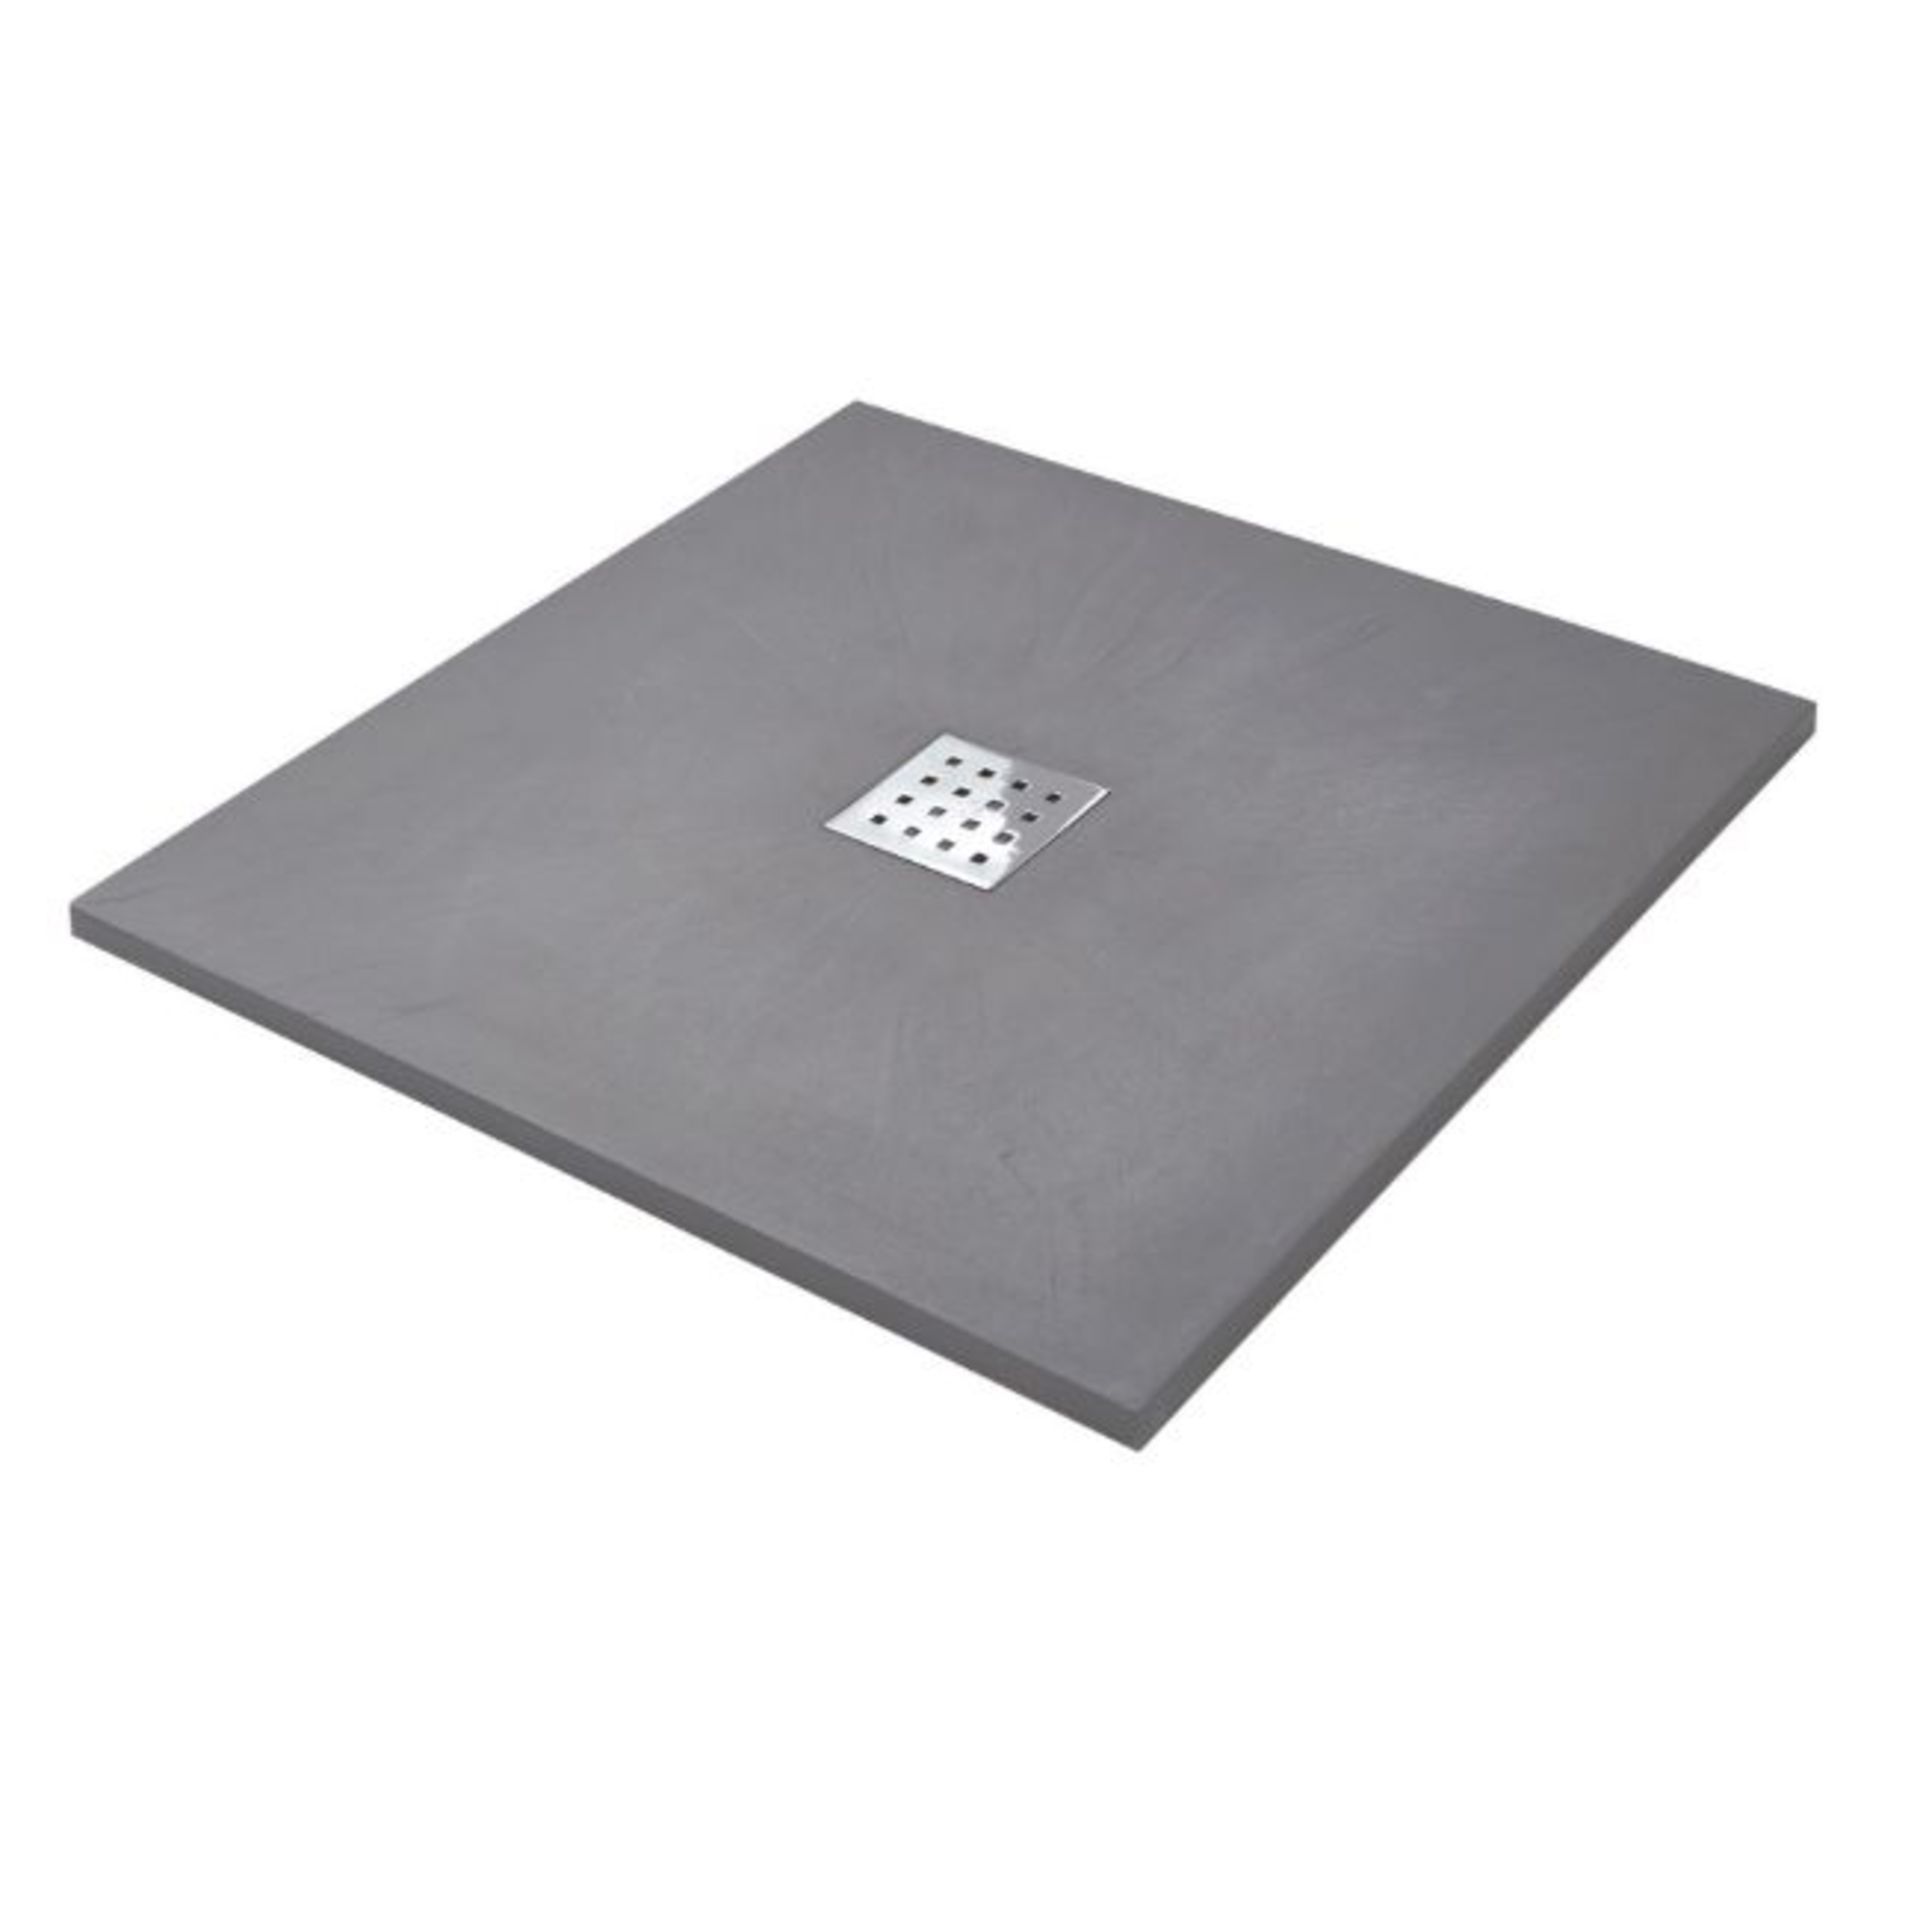 New 900x900mm Square Slate Effect Shower Tray In Grey. Manufactured In The Uk From High Grade ... - Image 2 of 2